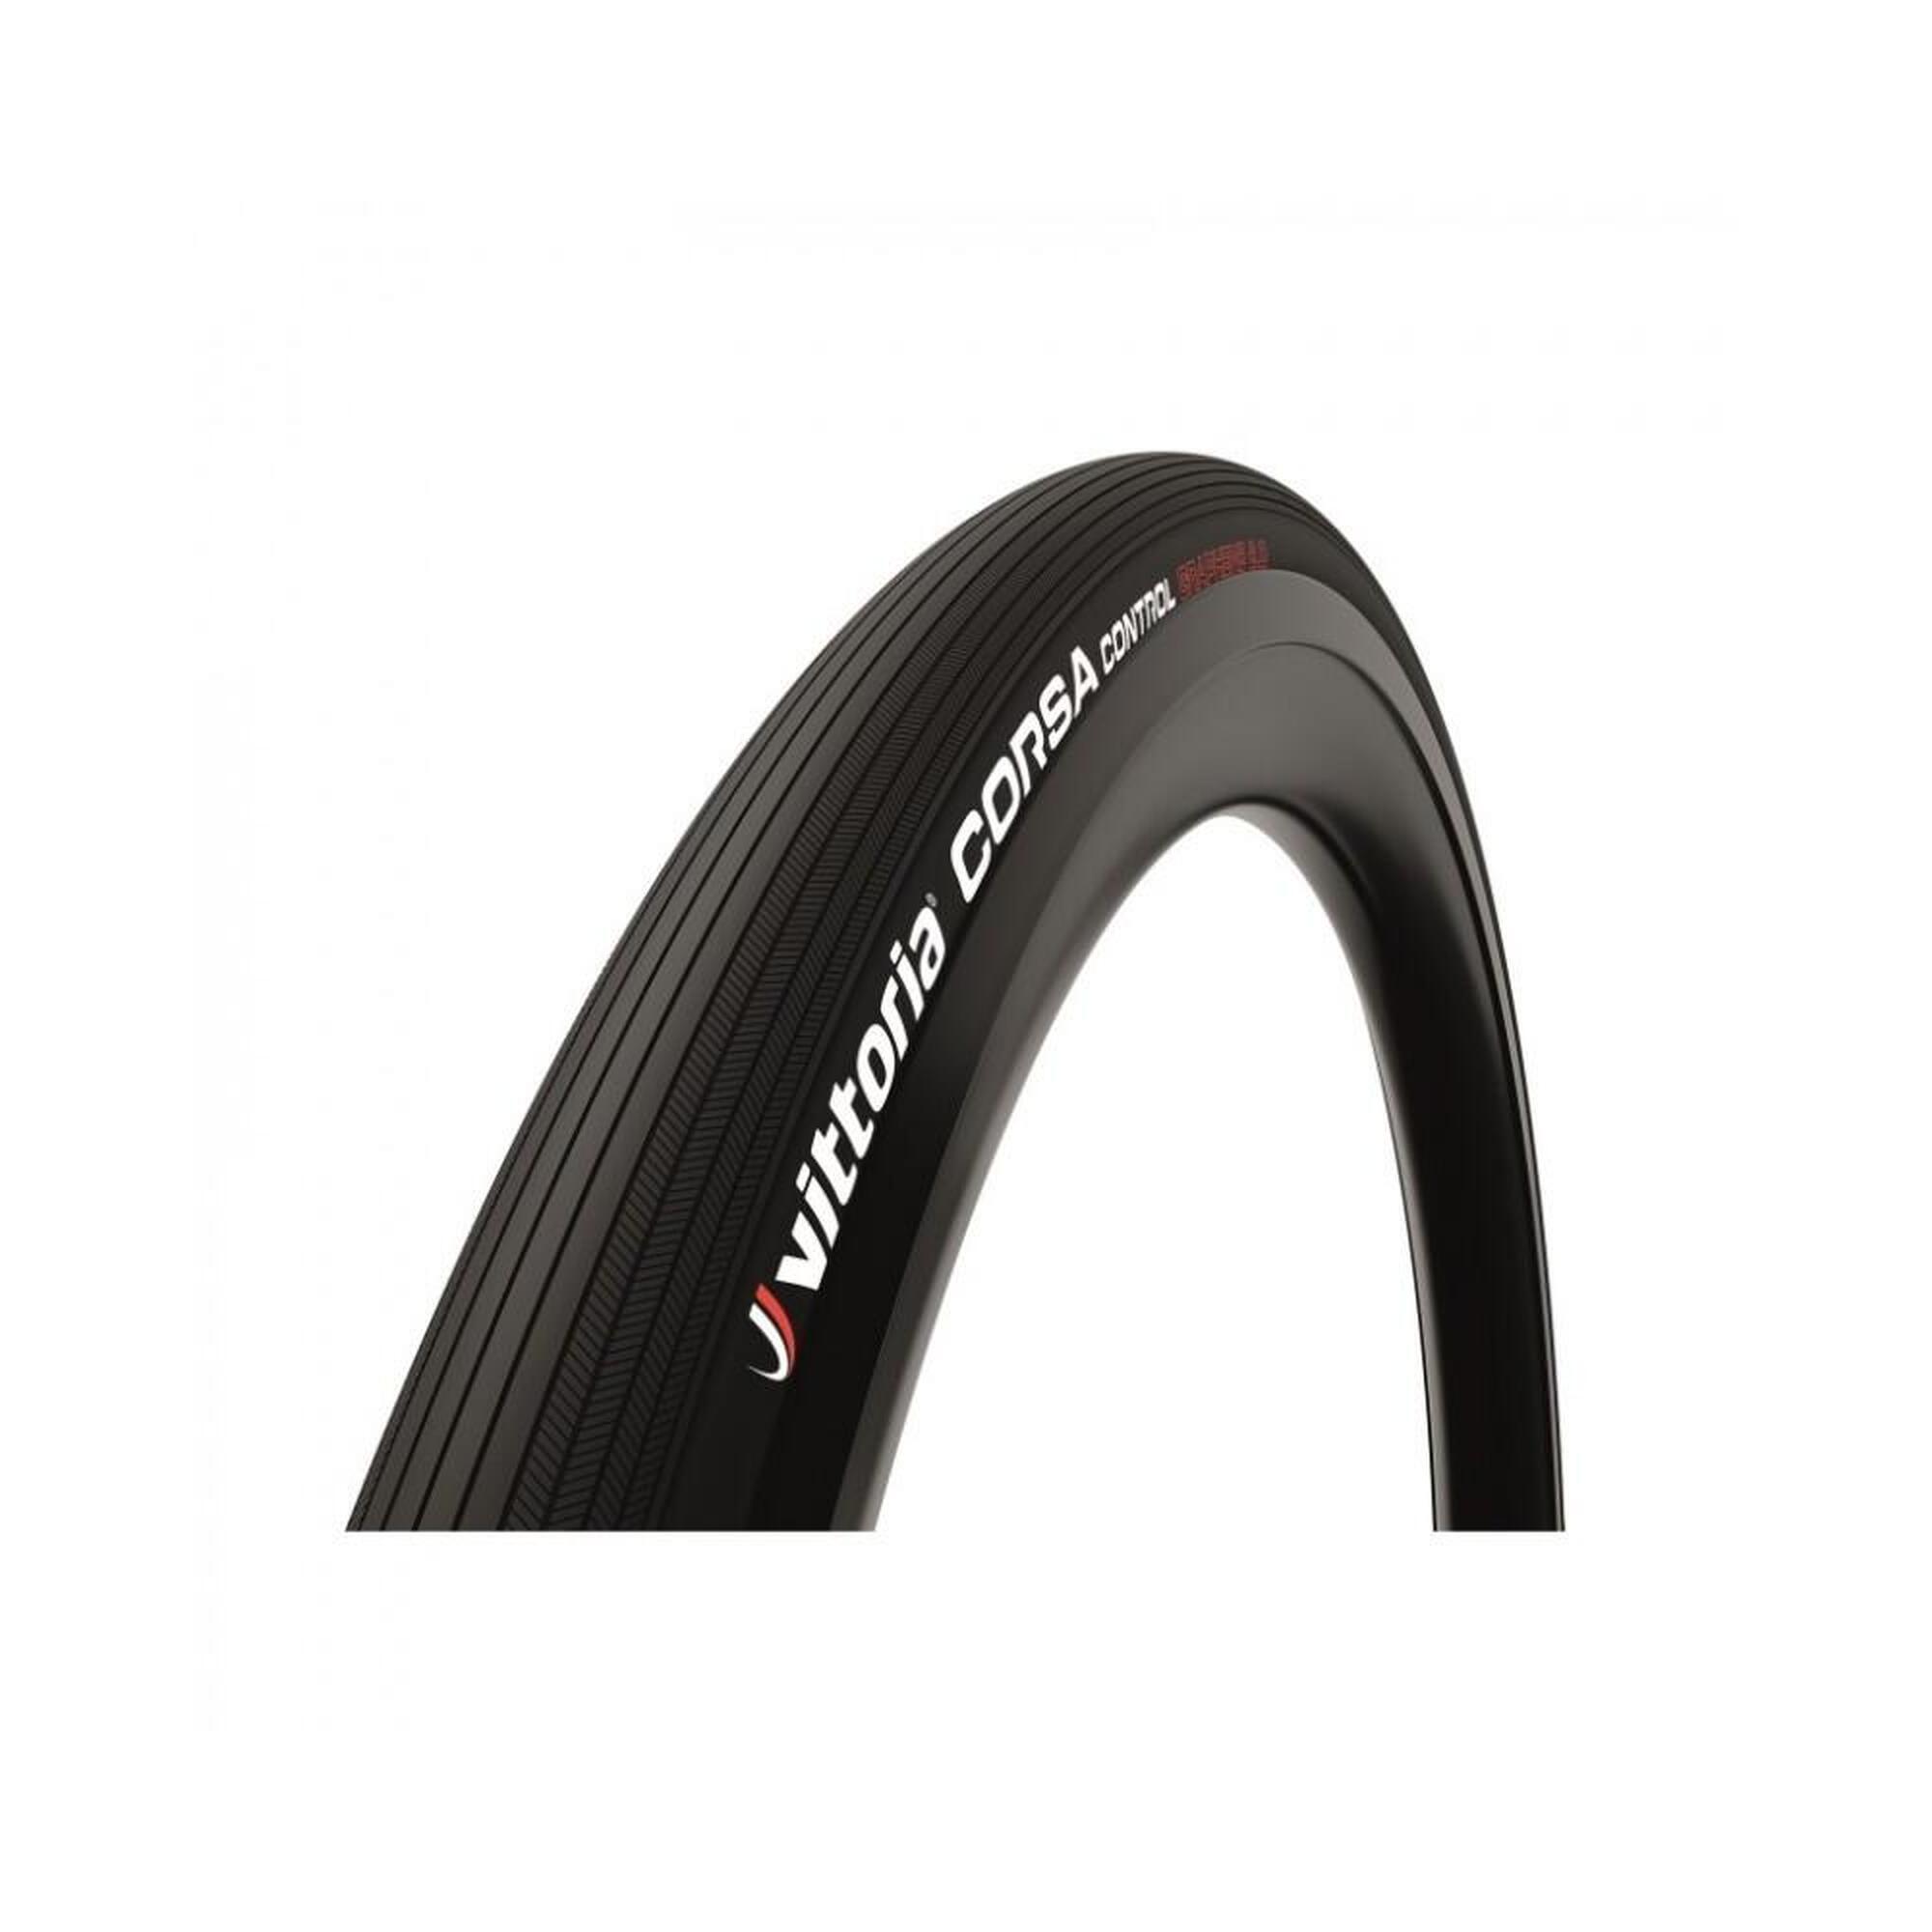 CORSA CONTROL TLR G2.0 (TUBELESS READY)